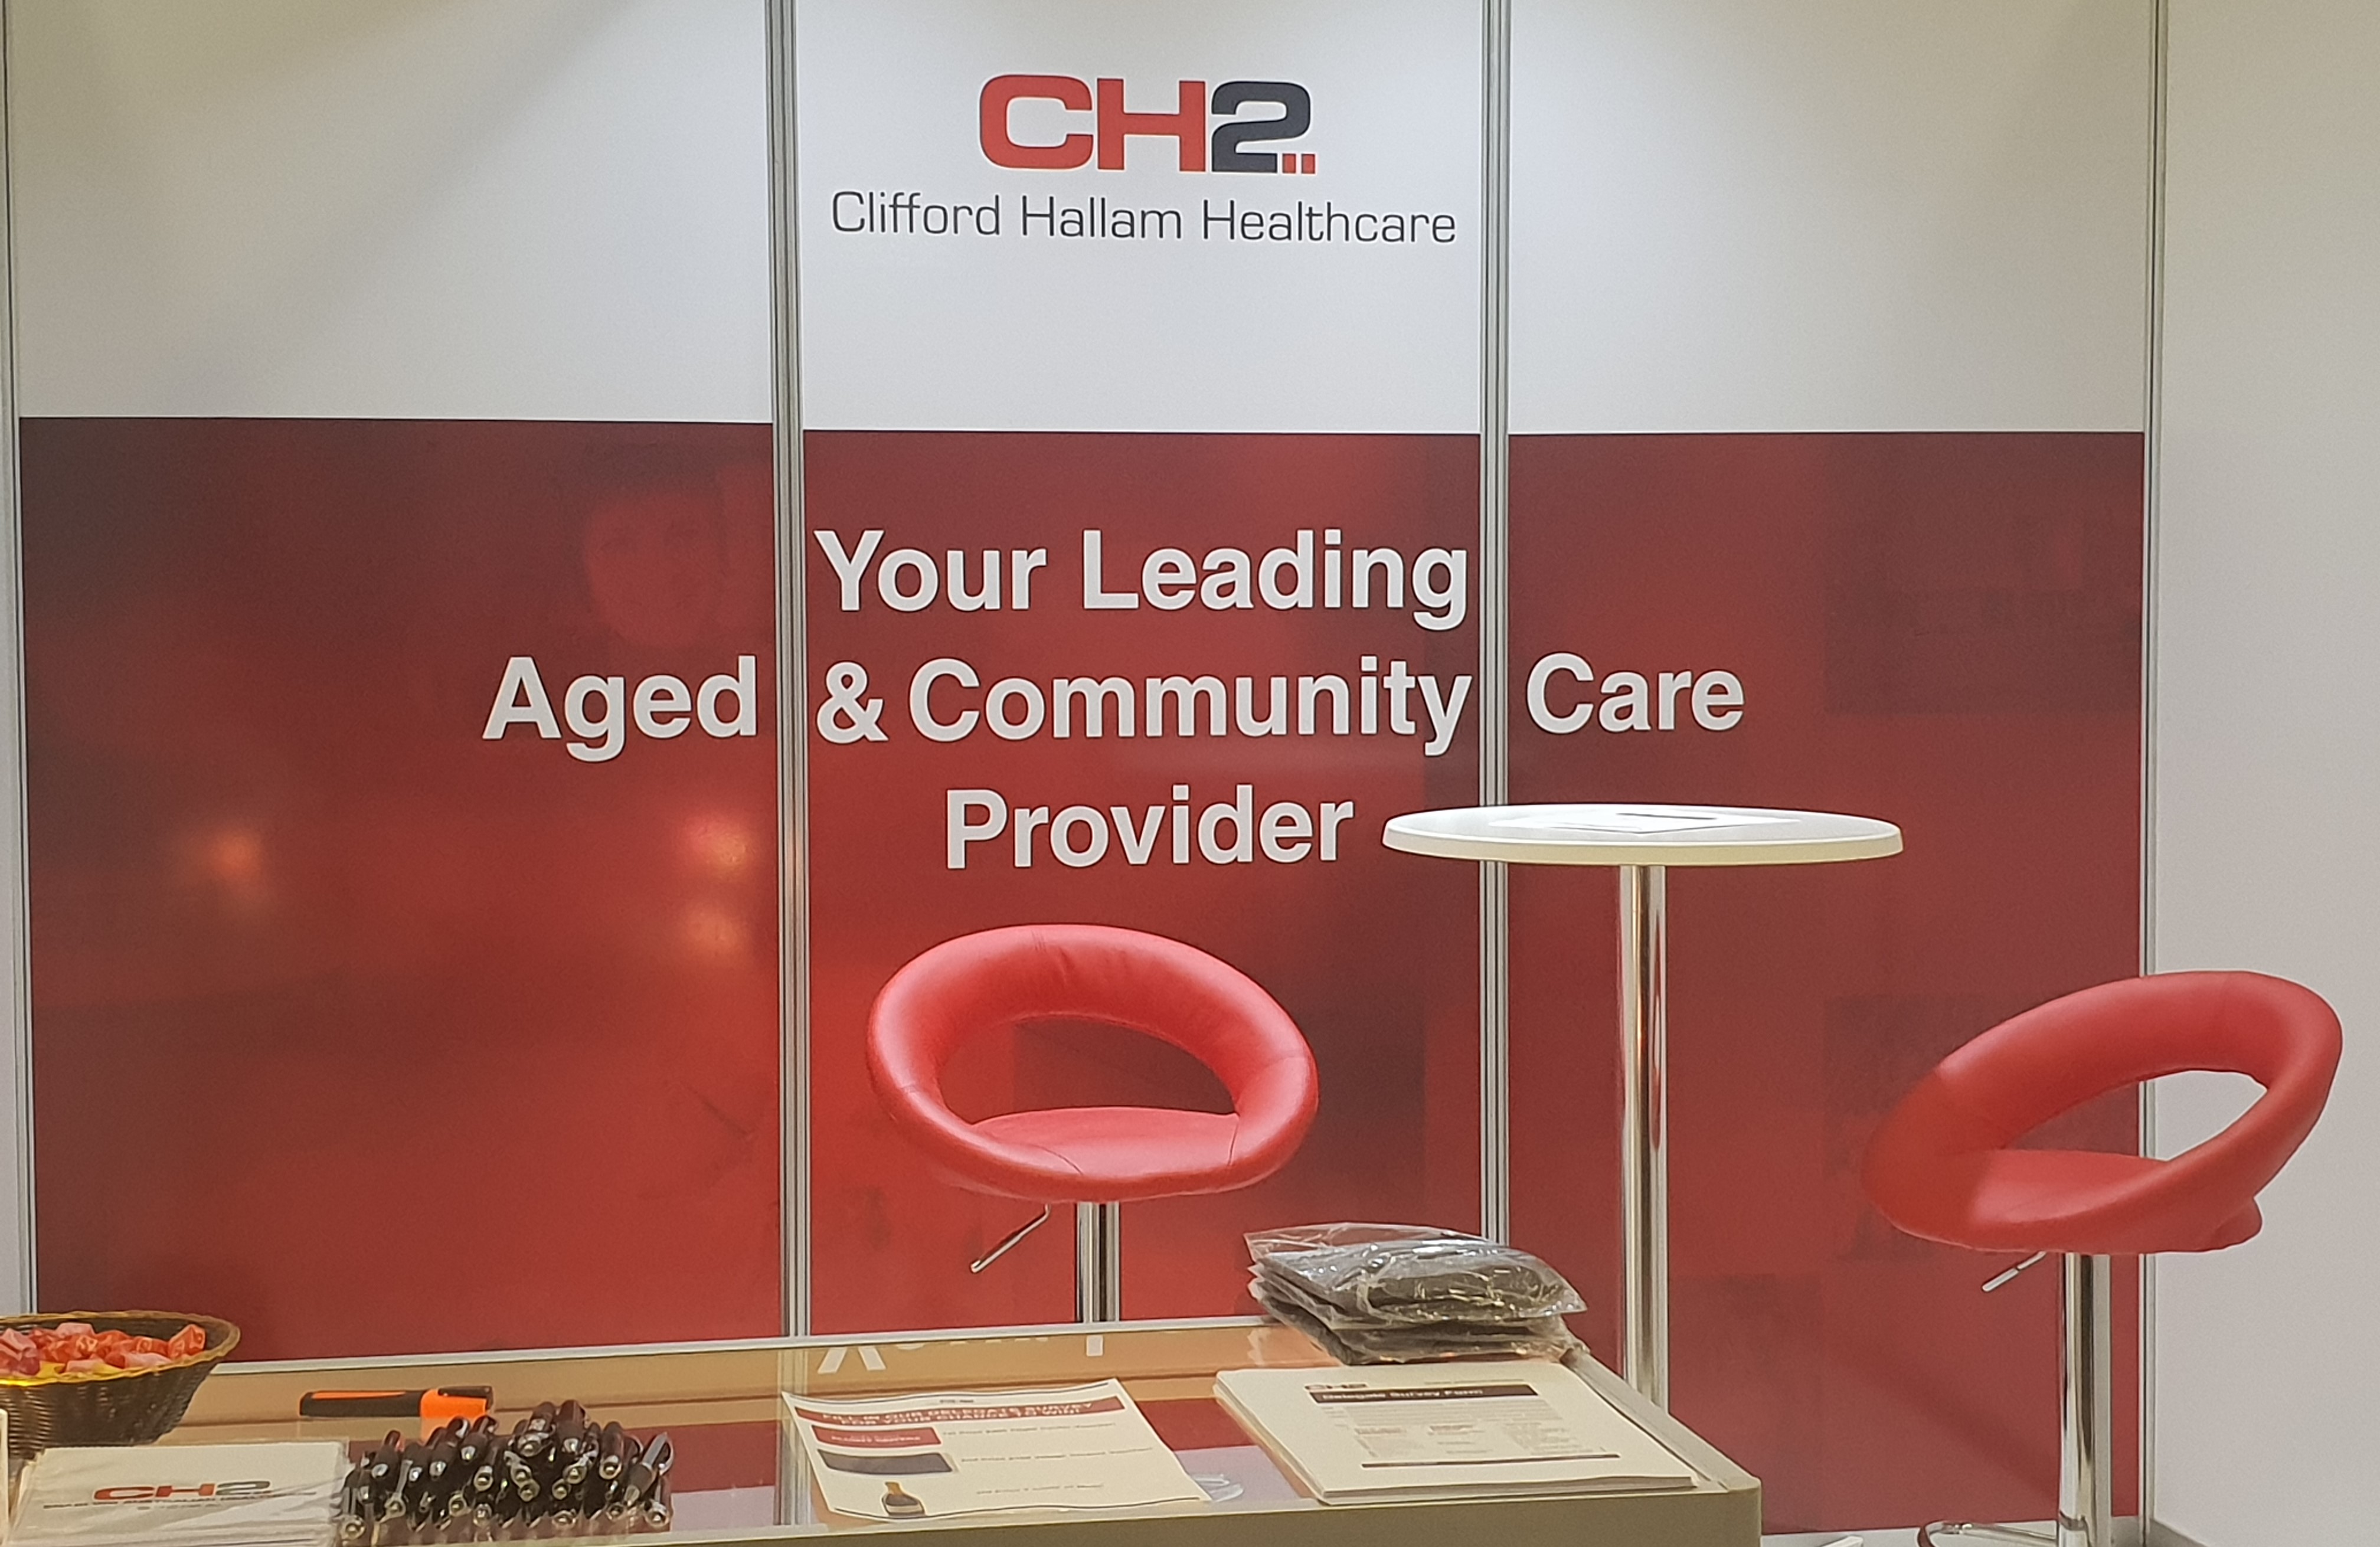 CH2 exhibition booth at CFA 2018